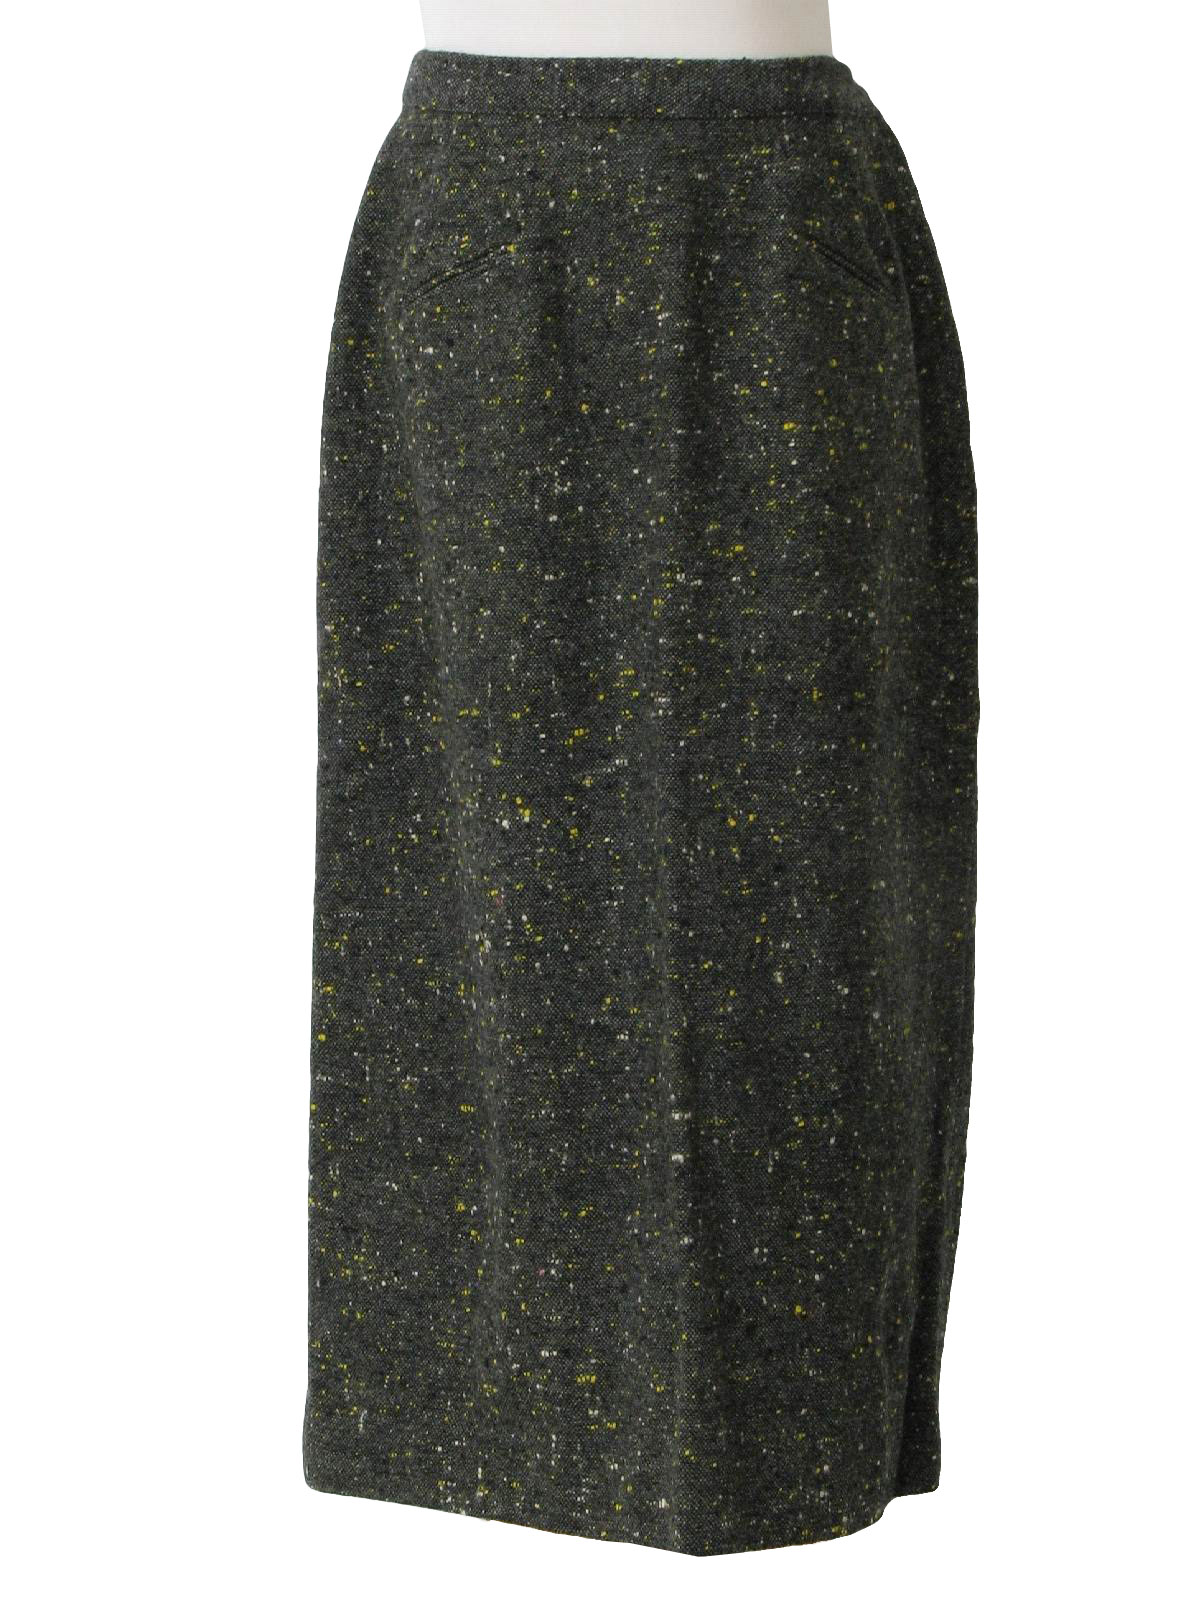 50s-60s Pencil Skirts